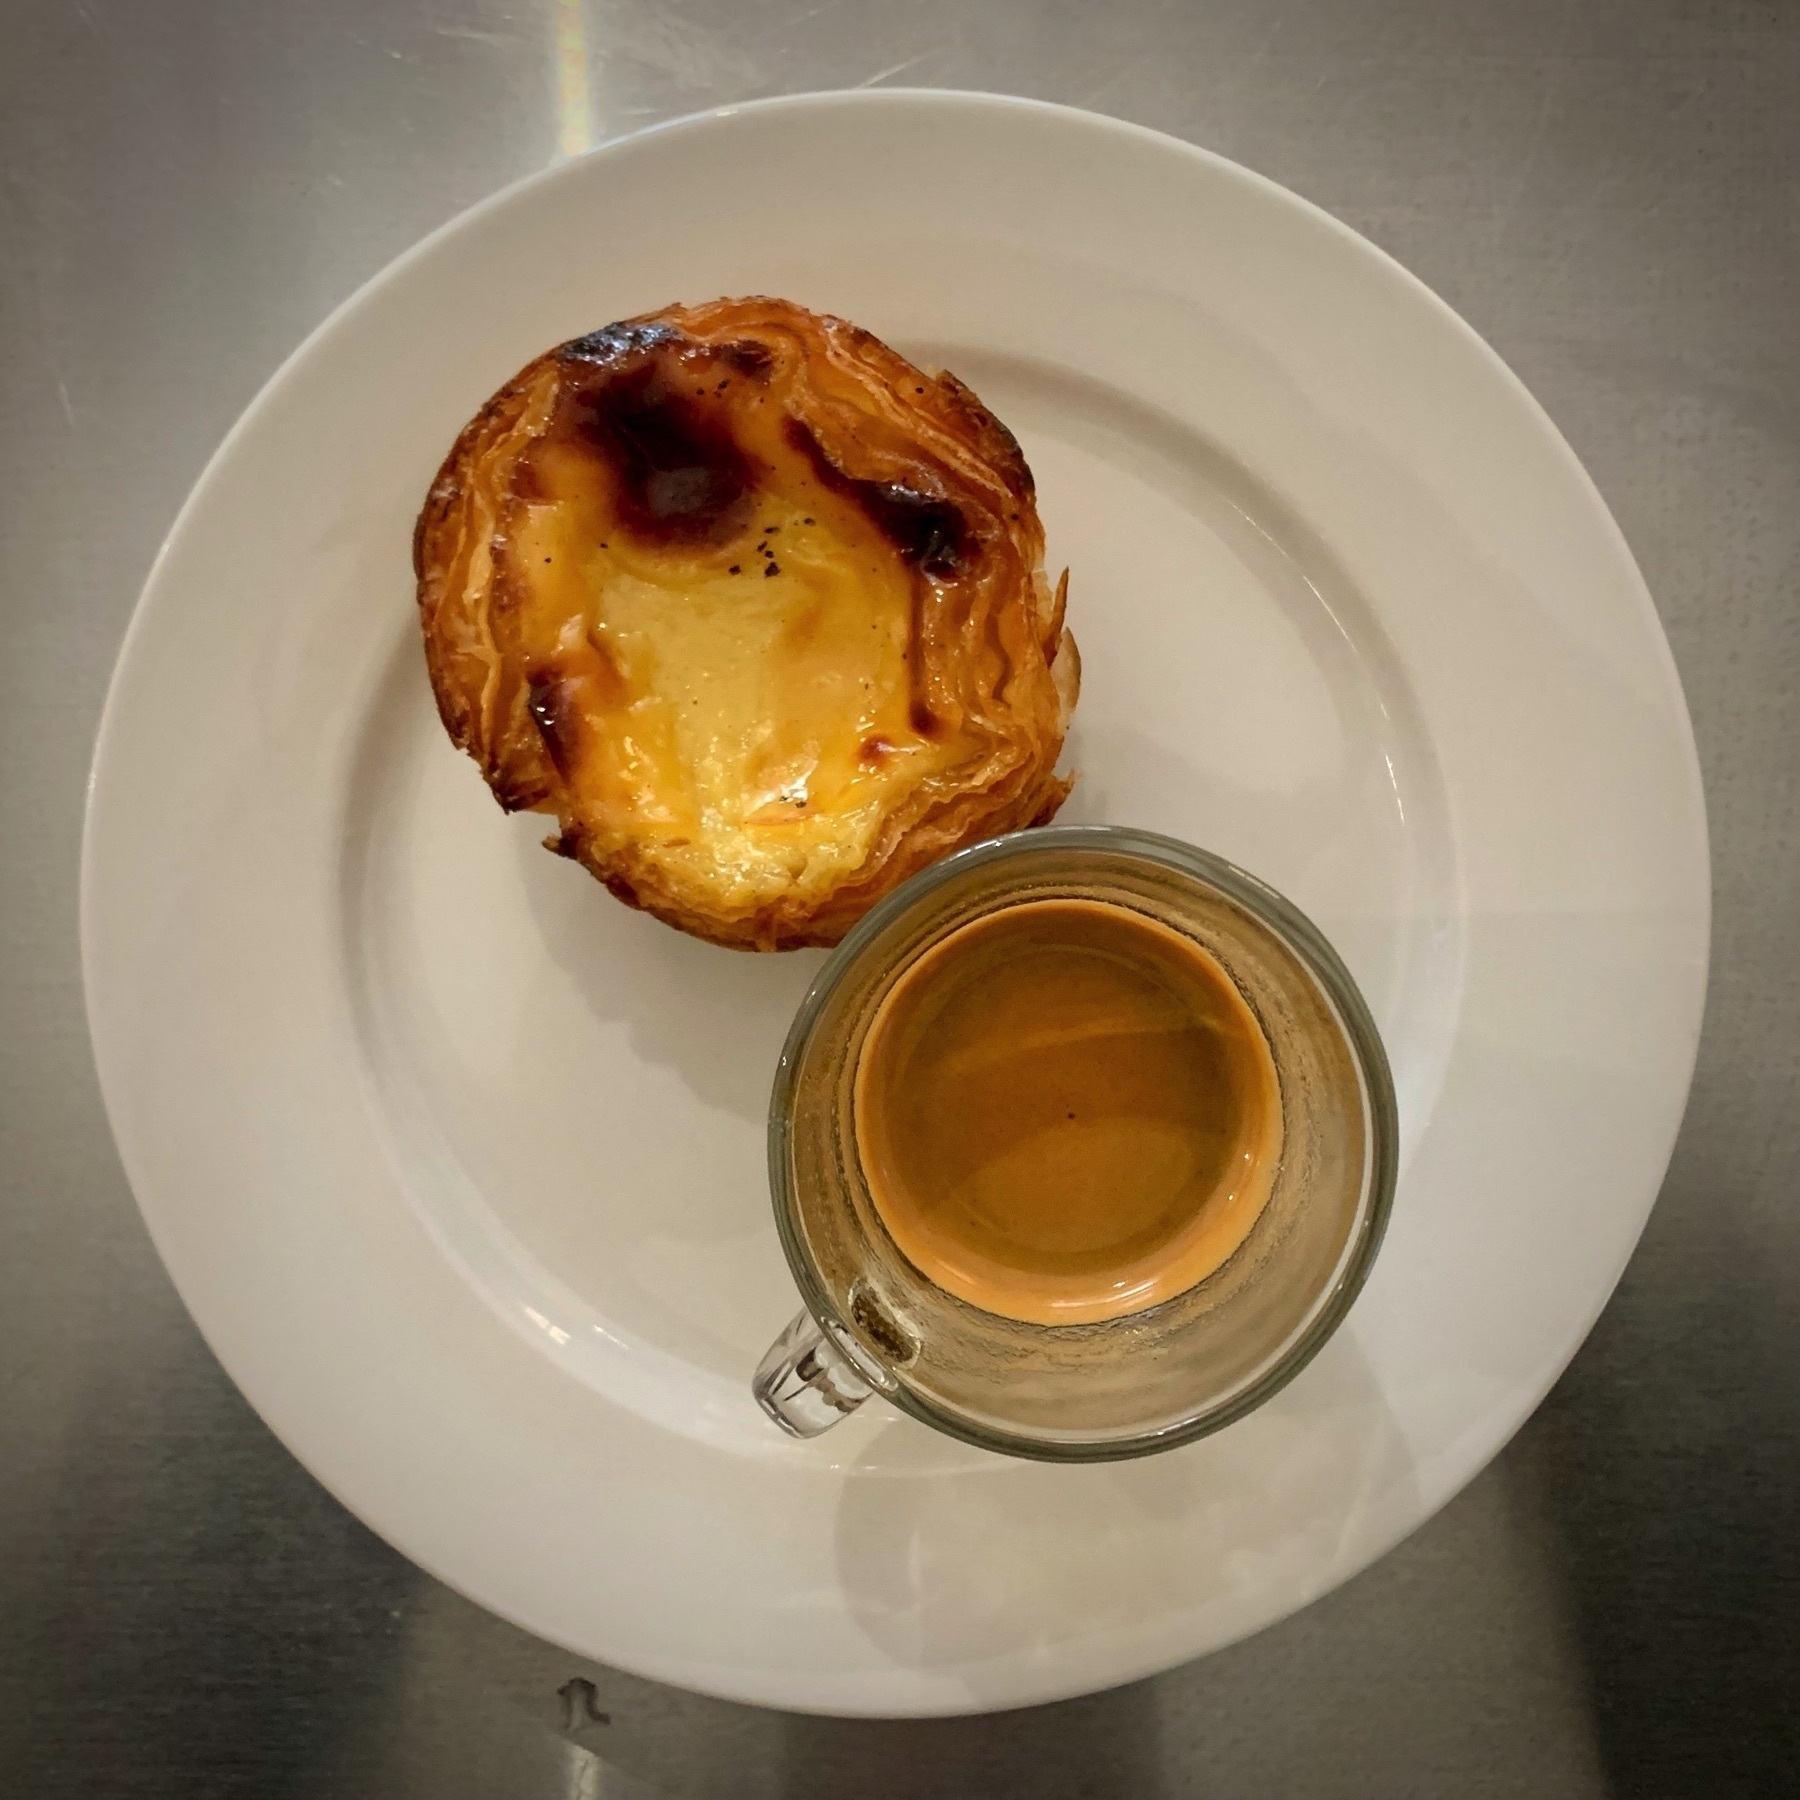 Espresso coffee in a glass cup and a Portuguese-style custard tart, set on a white plate